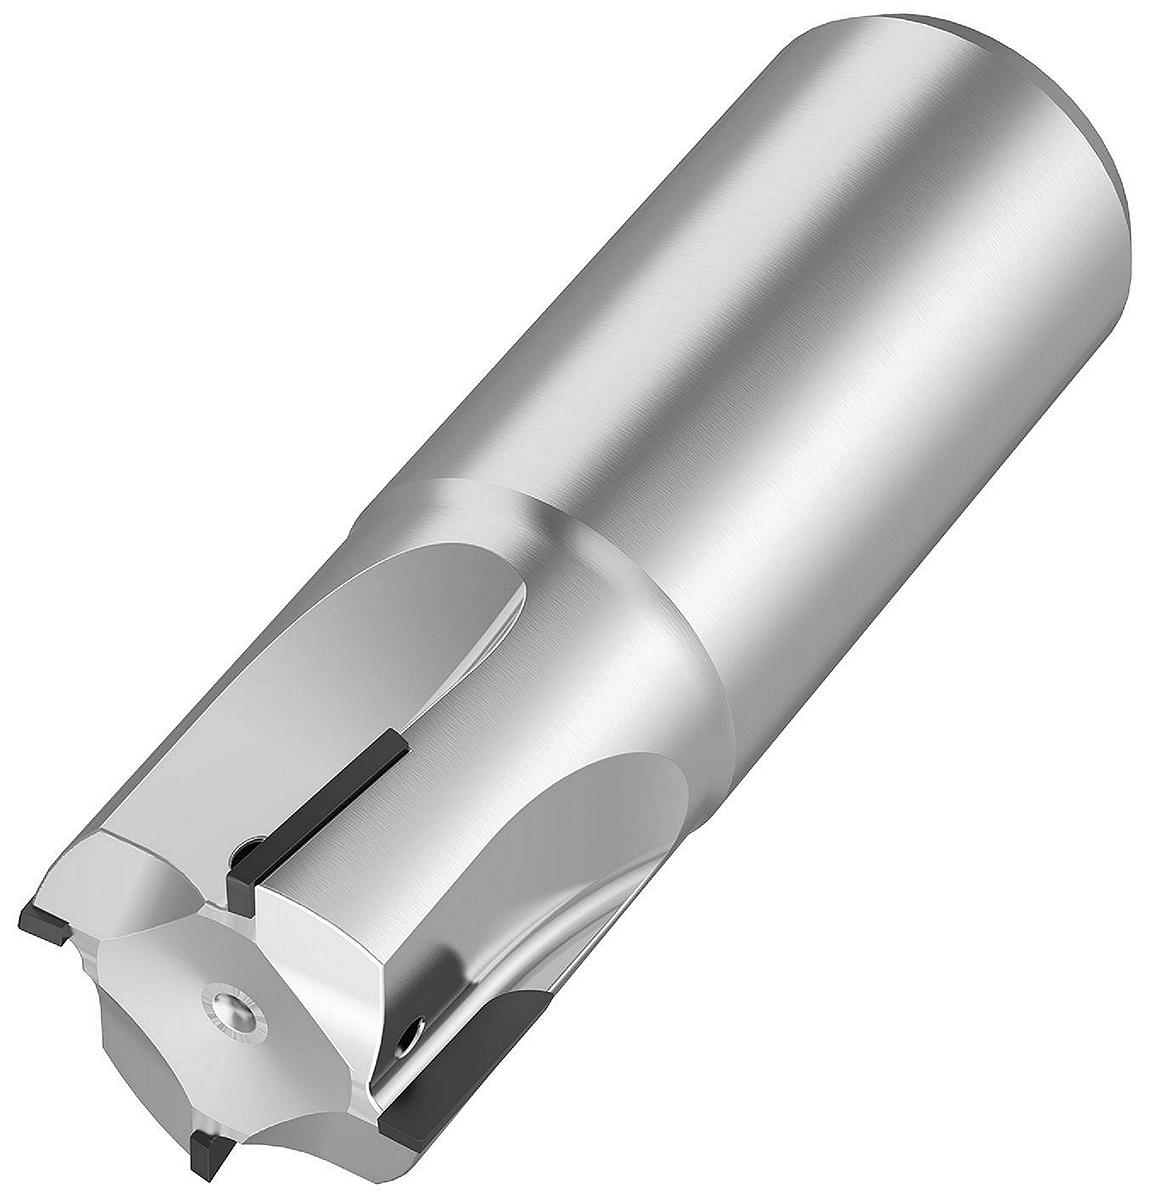 KenCut™ AQ PCD End Mill for Roughing and Finishing of Aluminum